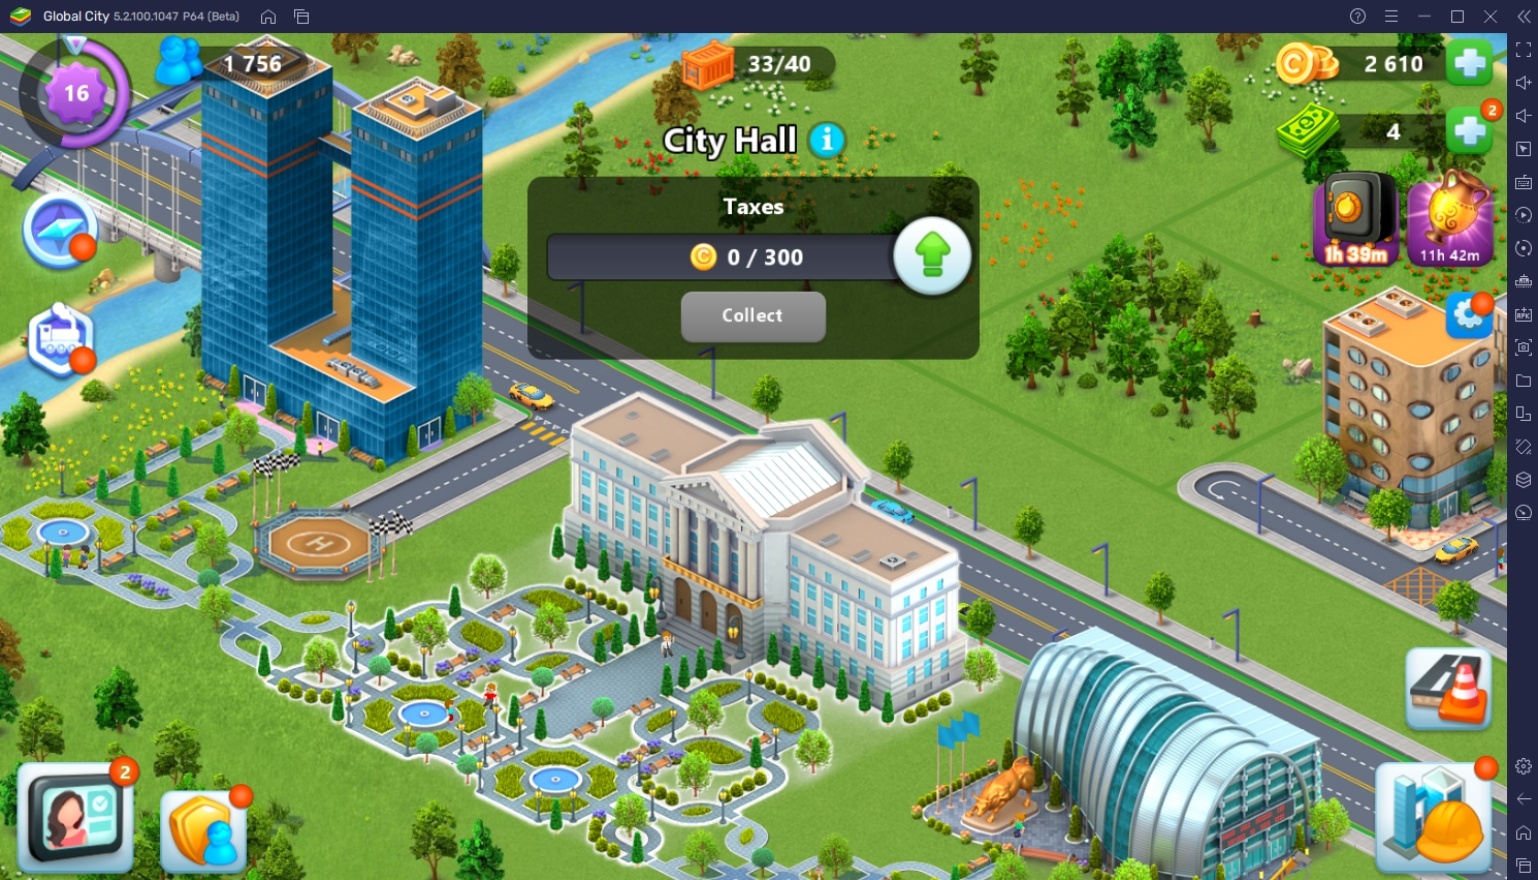 Fastest Way to Earn coins in Global City: Build and Harvest